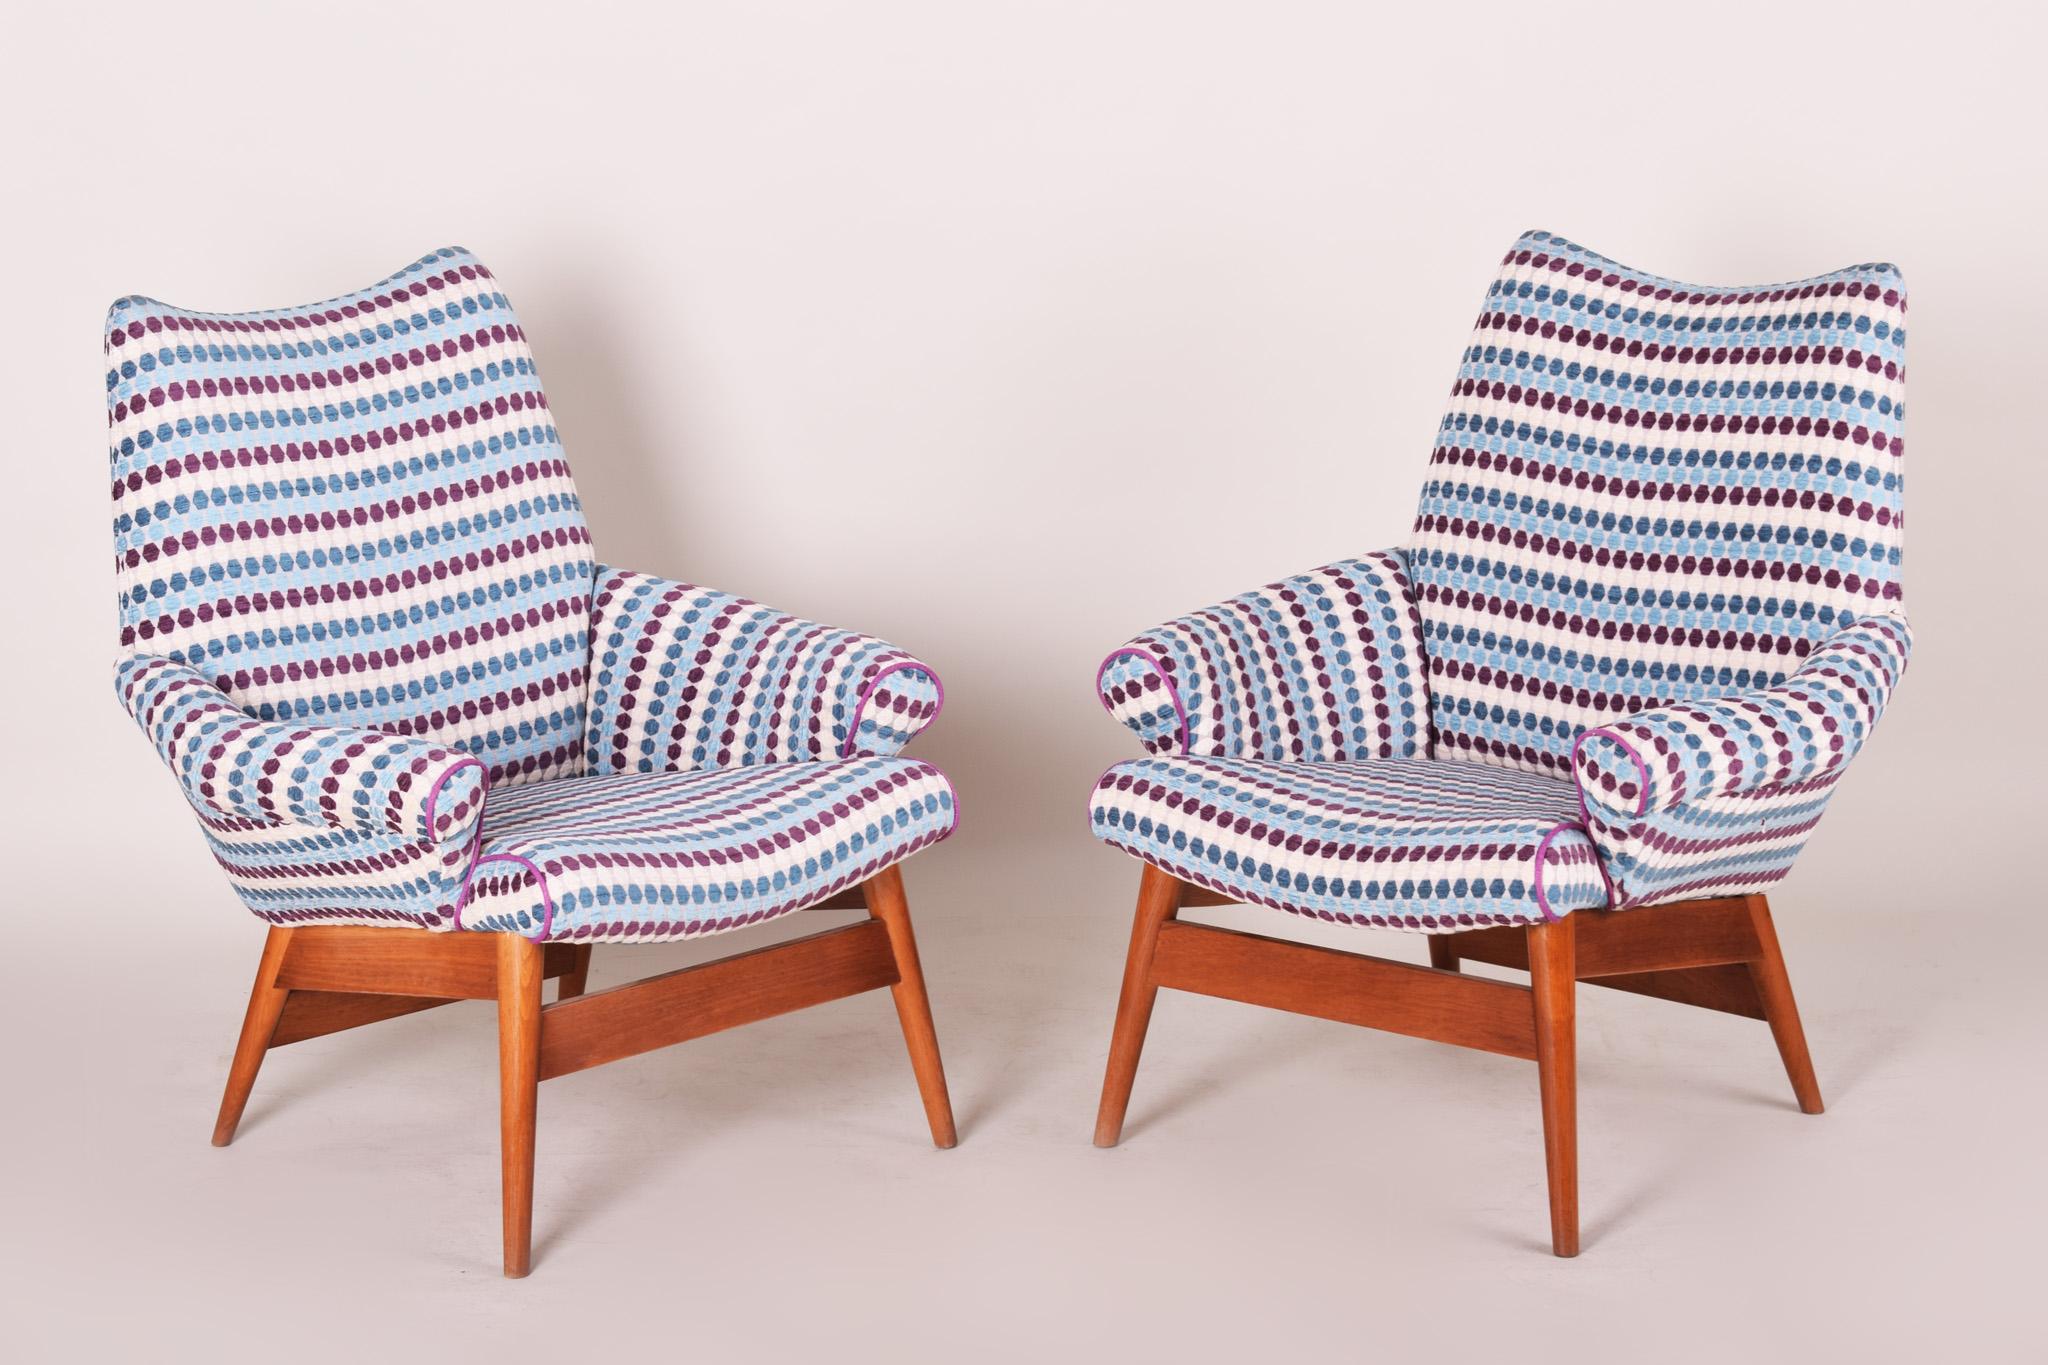 Pair of armchairs, midcentury Czechoslovakia
Period 1950-1960.
Material: Oak
New upholstery and fabric.





